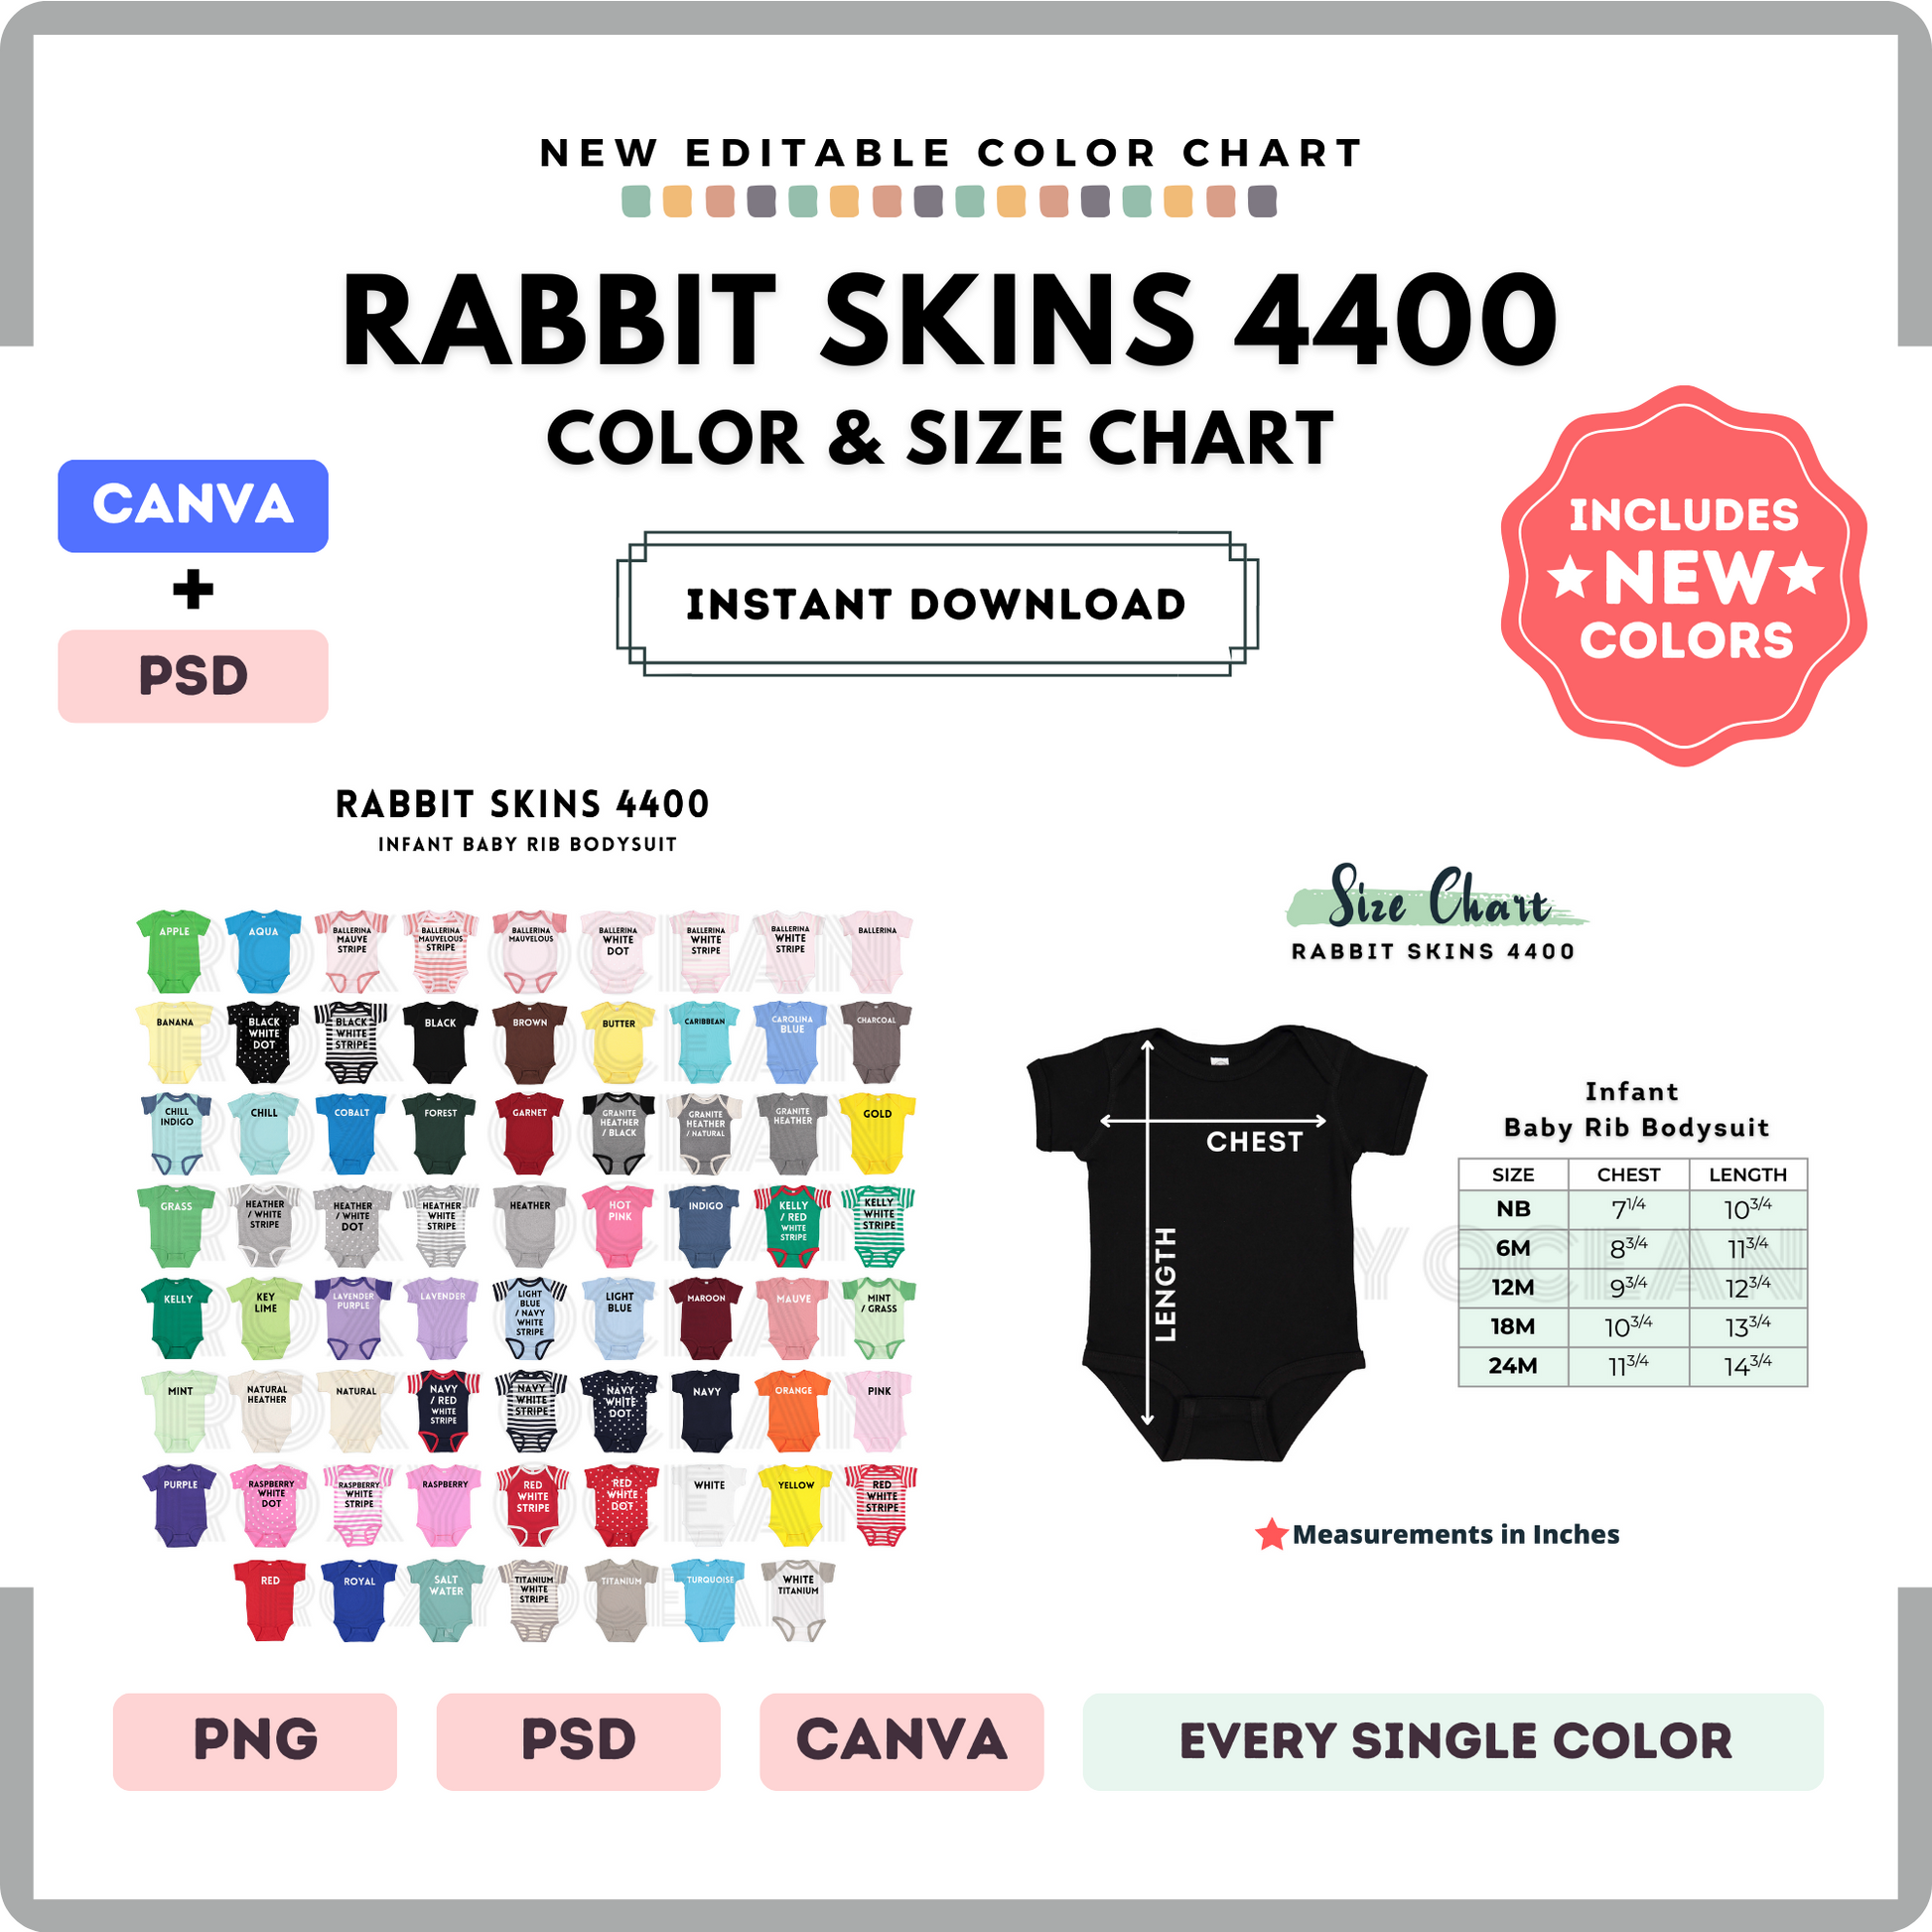 Rabbit Skins 4400 Color and Size Chart